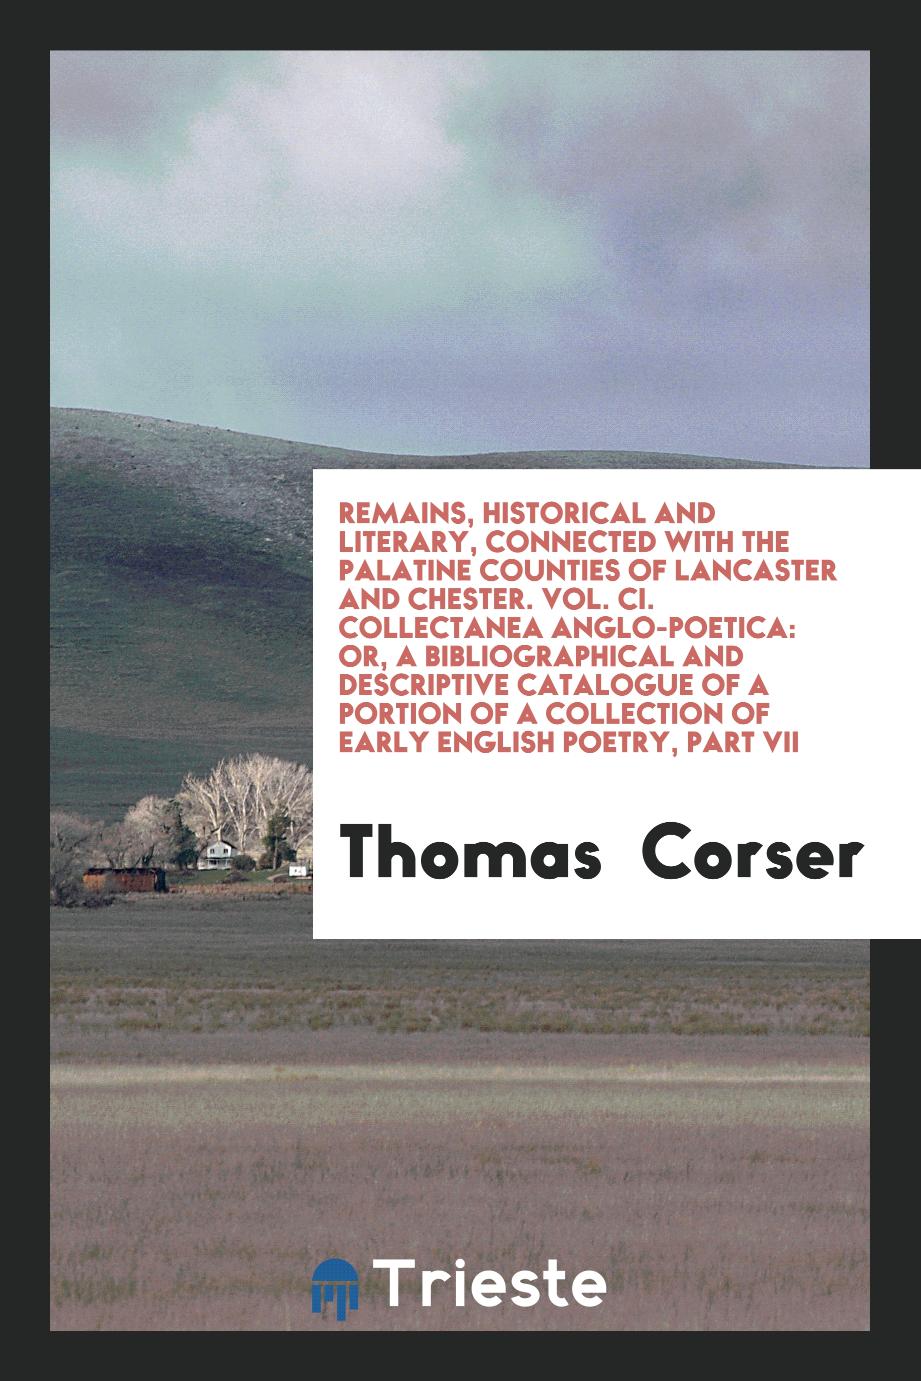 Remains, Historical and Literary, Connected with the Palatine Counties of Lancaster and Chester. Vol. CI. Collectanea Anglo-Poetica: Or, A Bibliographical and Descriptive Catalogue of a Portion of a Collection of Early English Poetry, Part VII